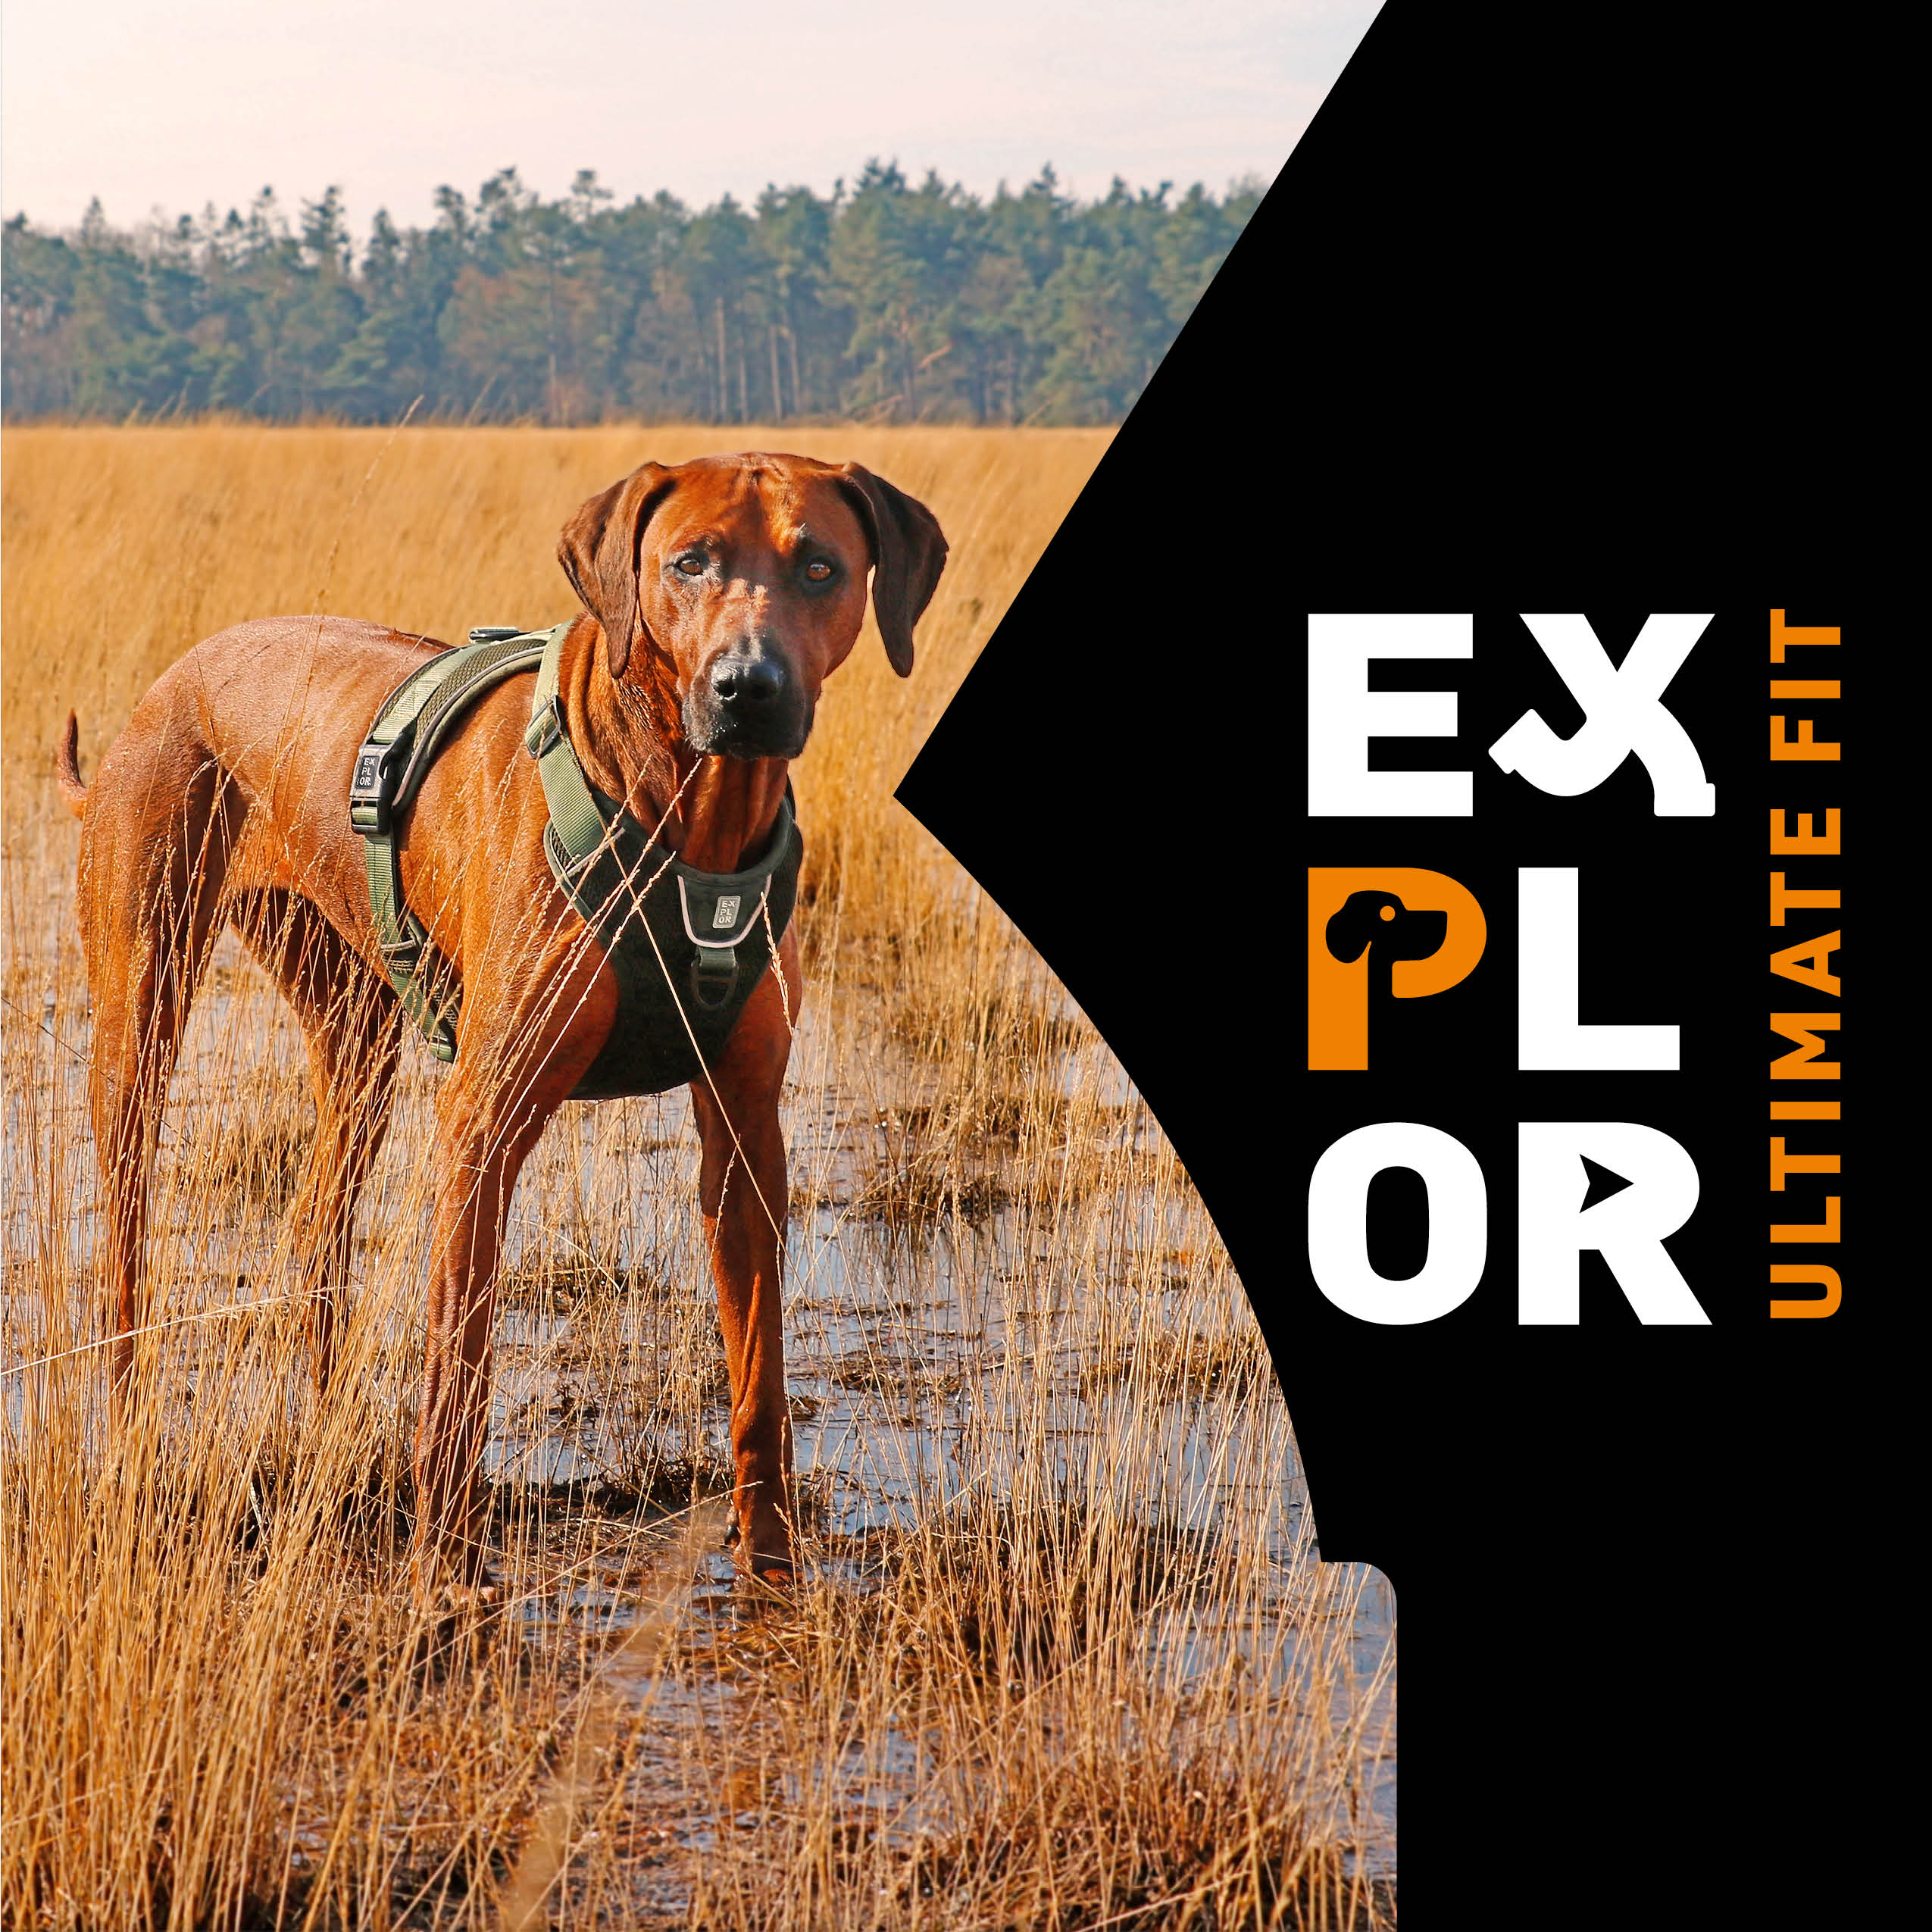 NEW! EXPLOR Ultimate Fit: Harnesses, collars and leads